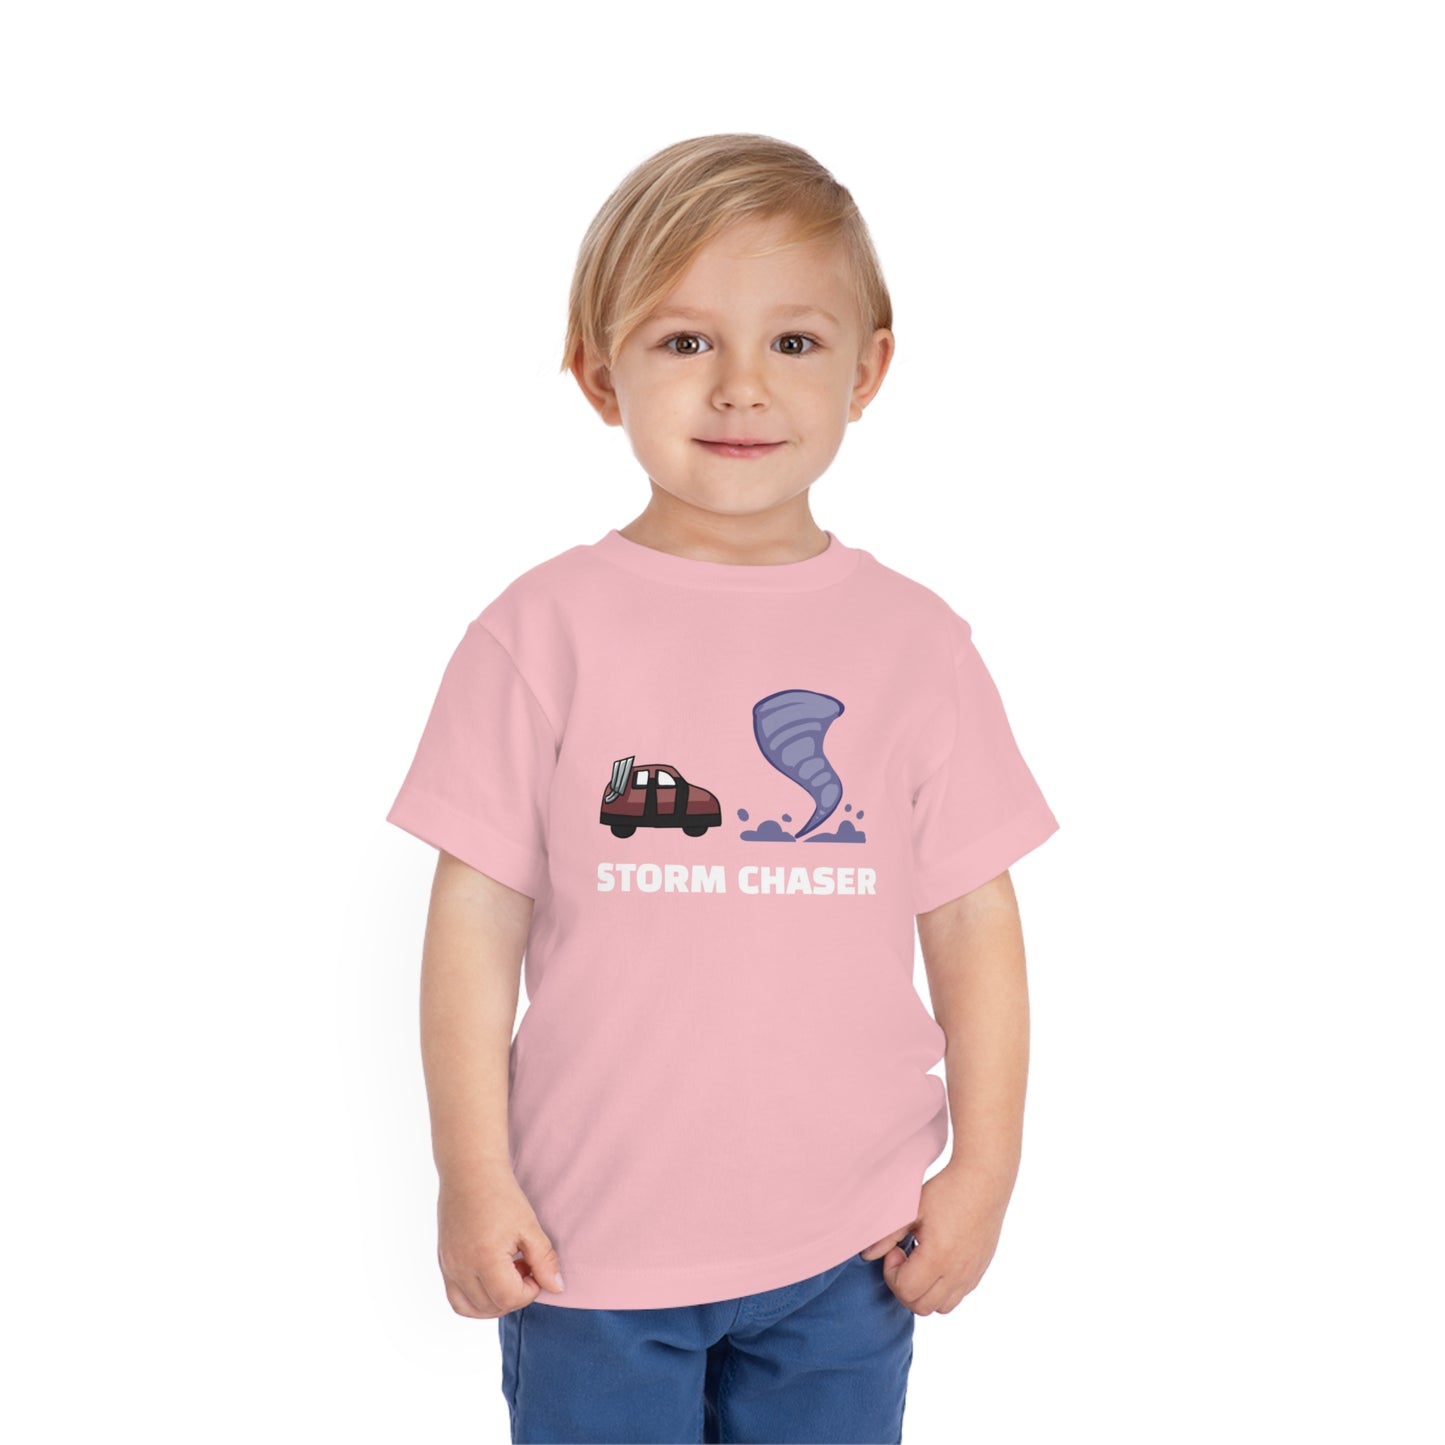 STORM CHASER DOMINATOR TODDLER TEE - Never Stop Chasing